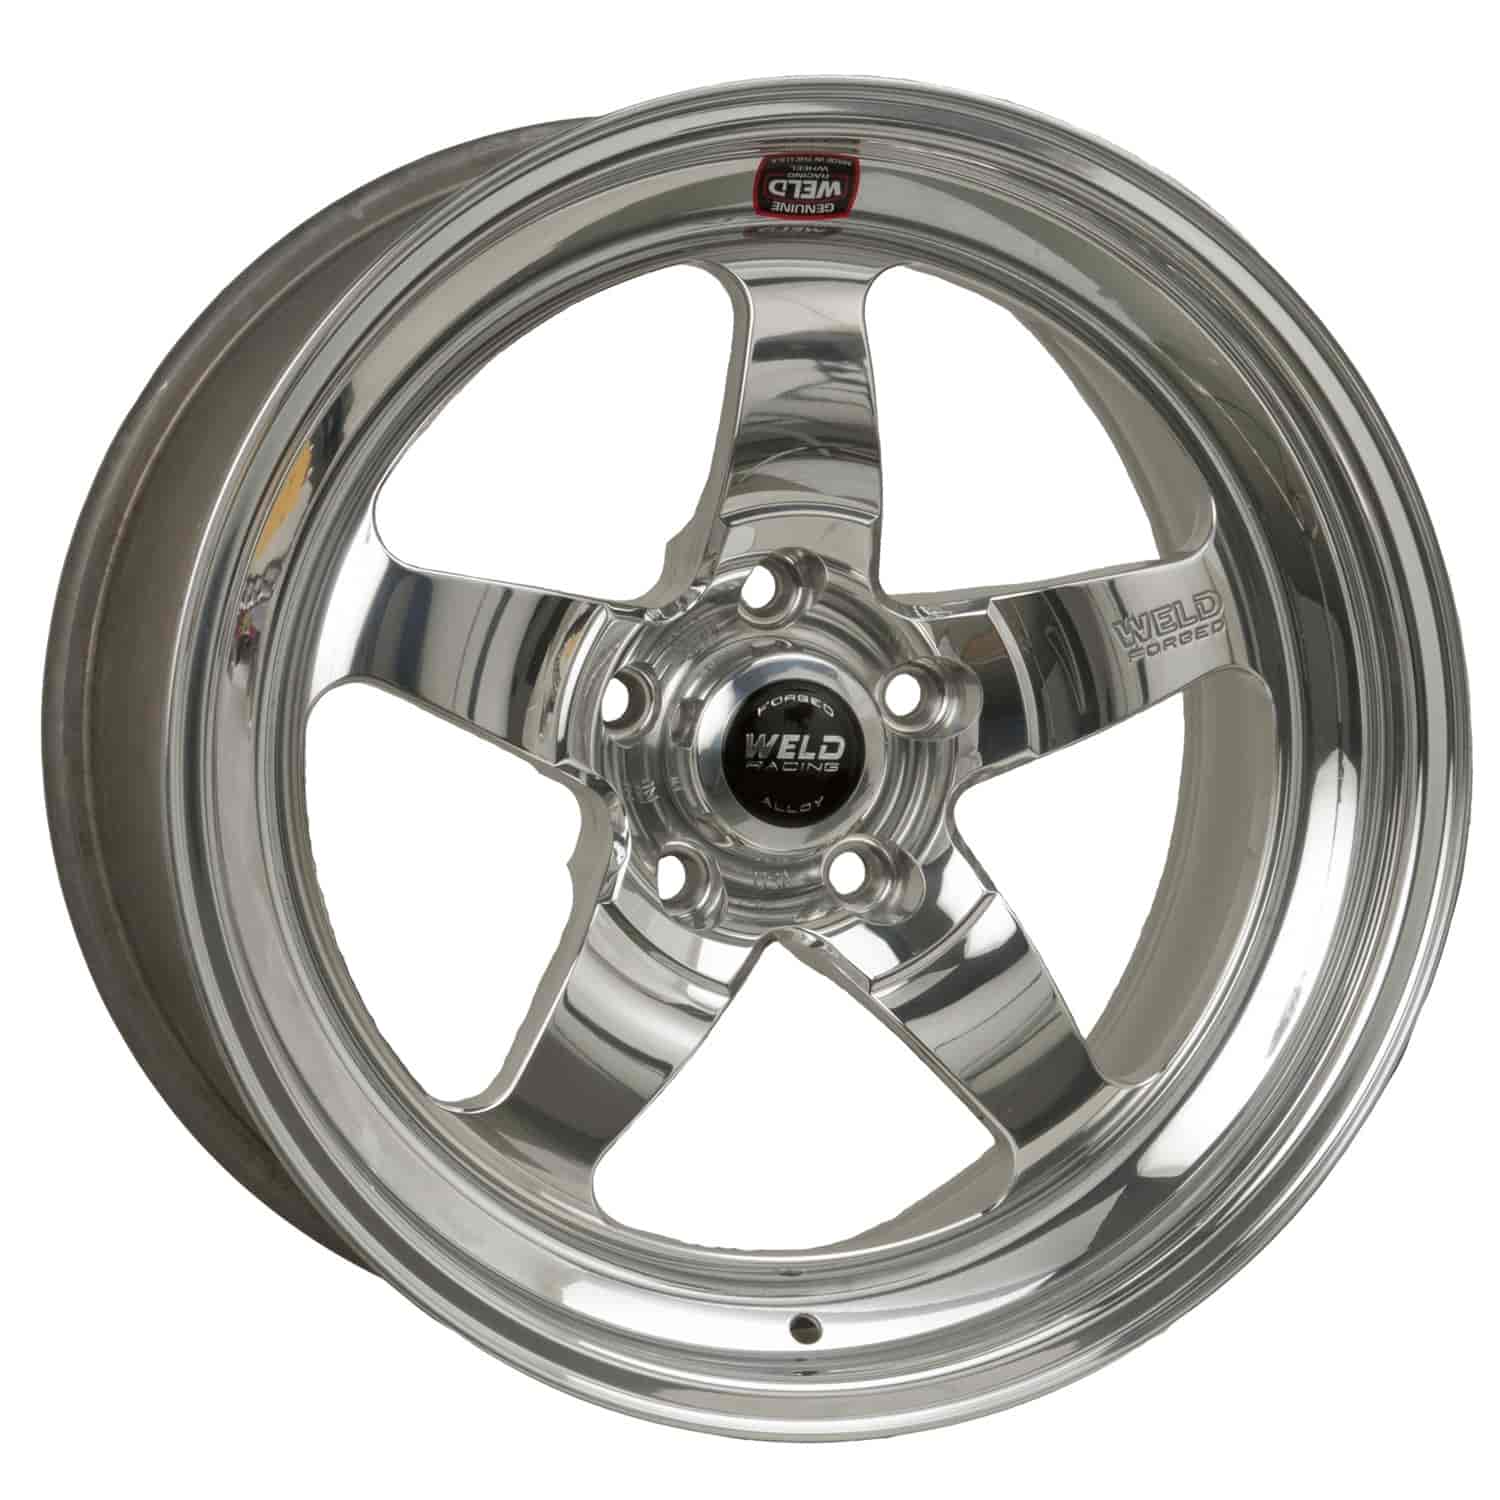 RT-S Series Wheel Size: 17" x 10" Bolt Circle: 5 x 120mm Rear Spacing: 7.20" Polished